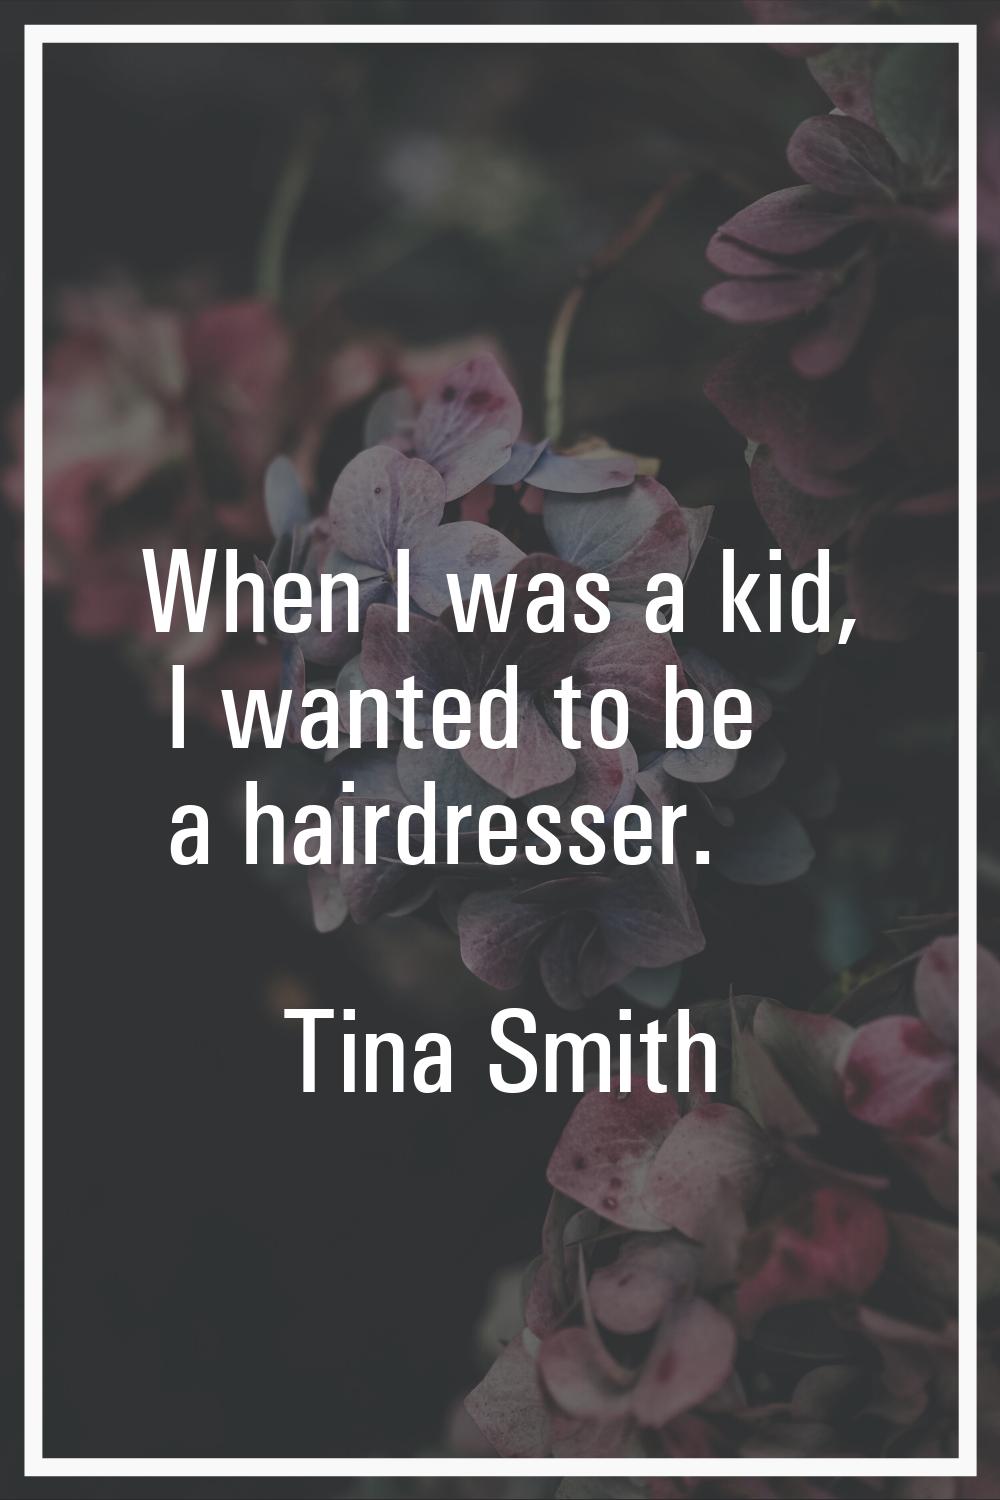 When I was a kid, I wanted to be a hairdresser.